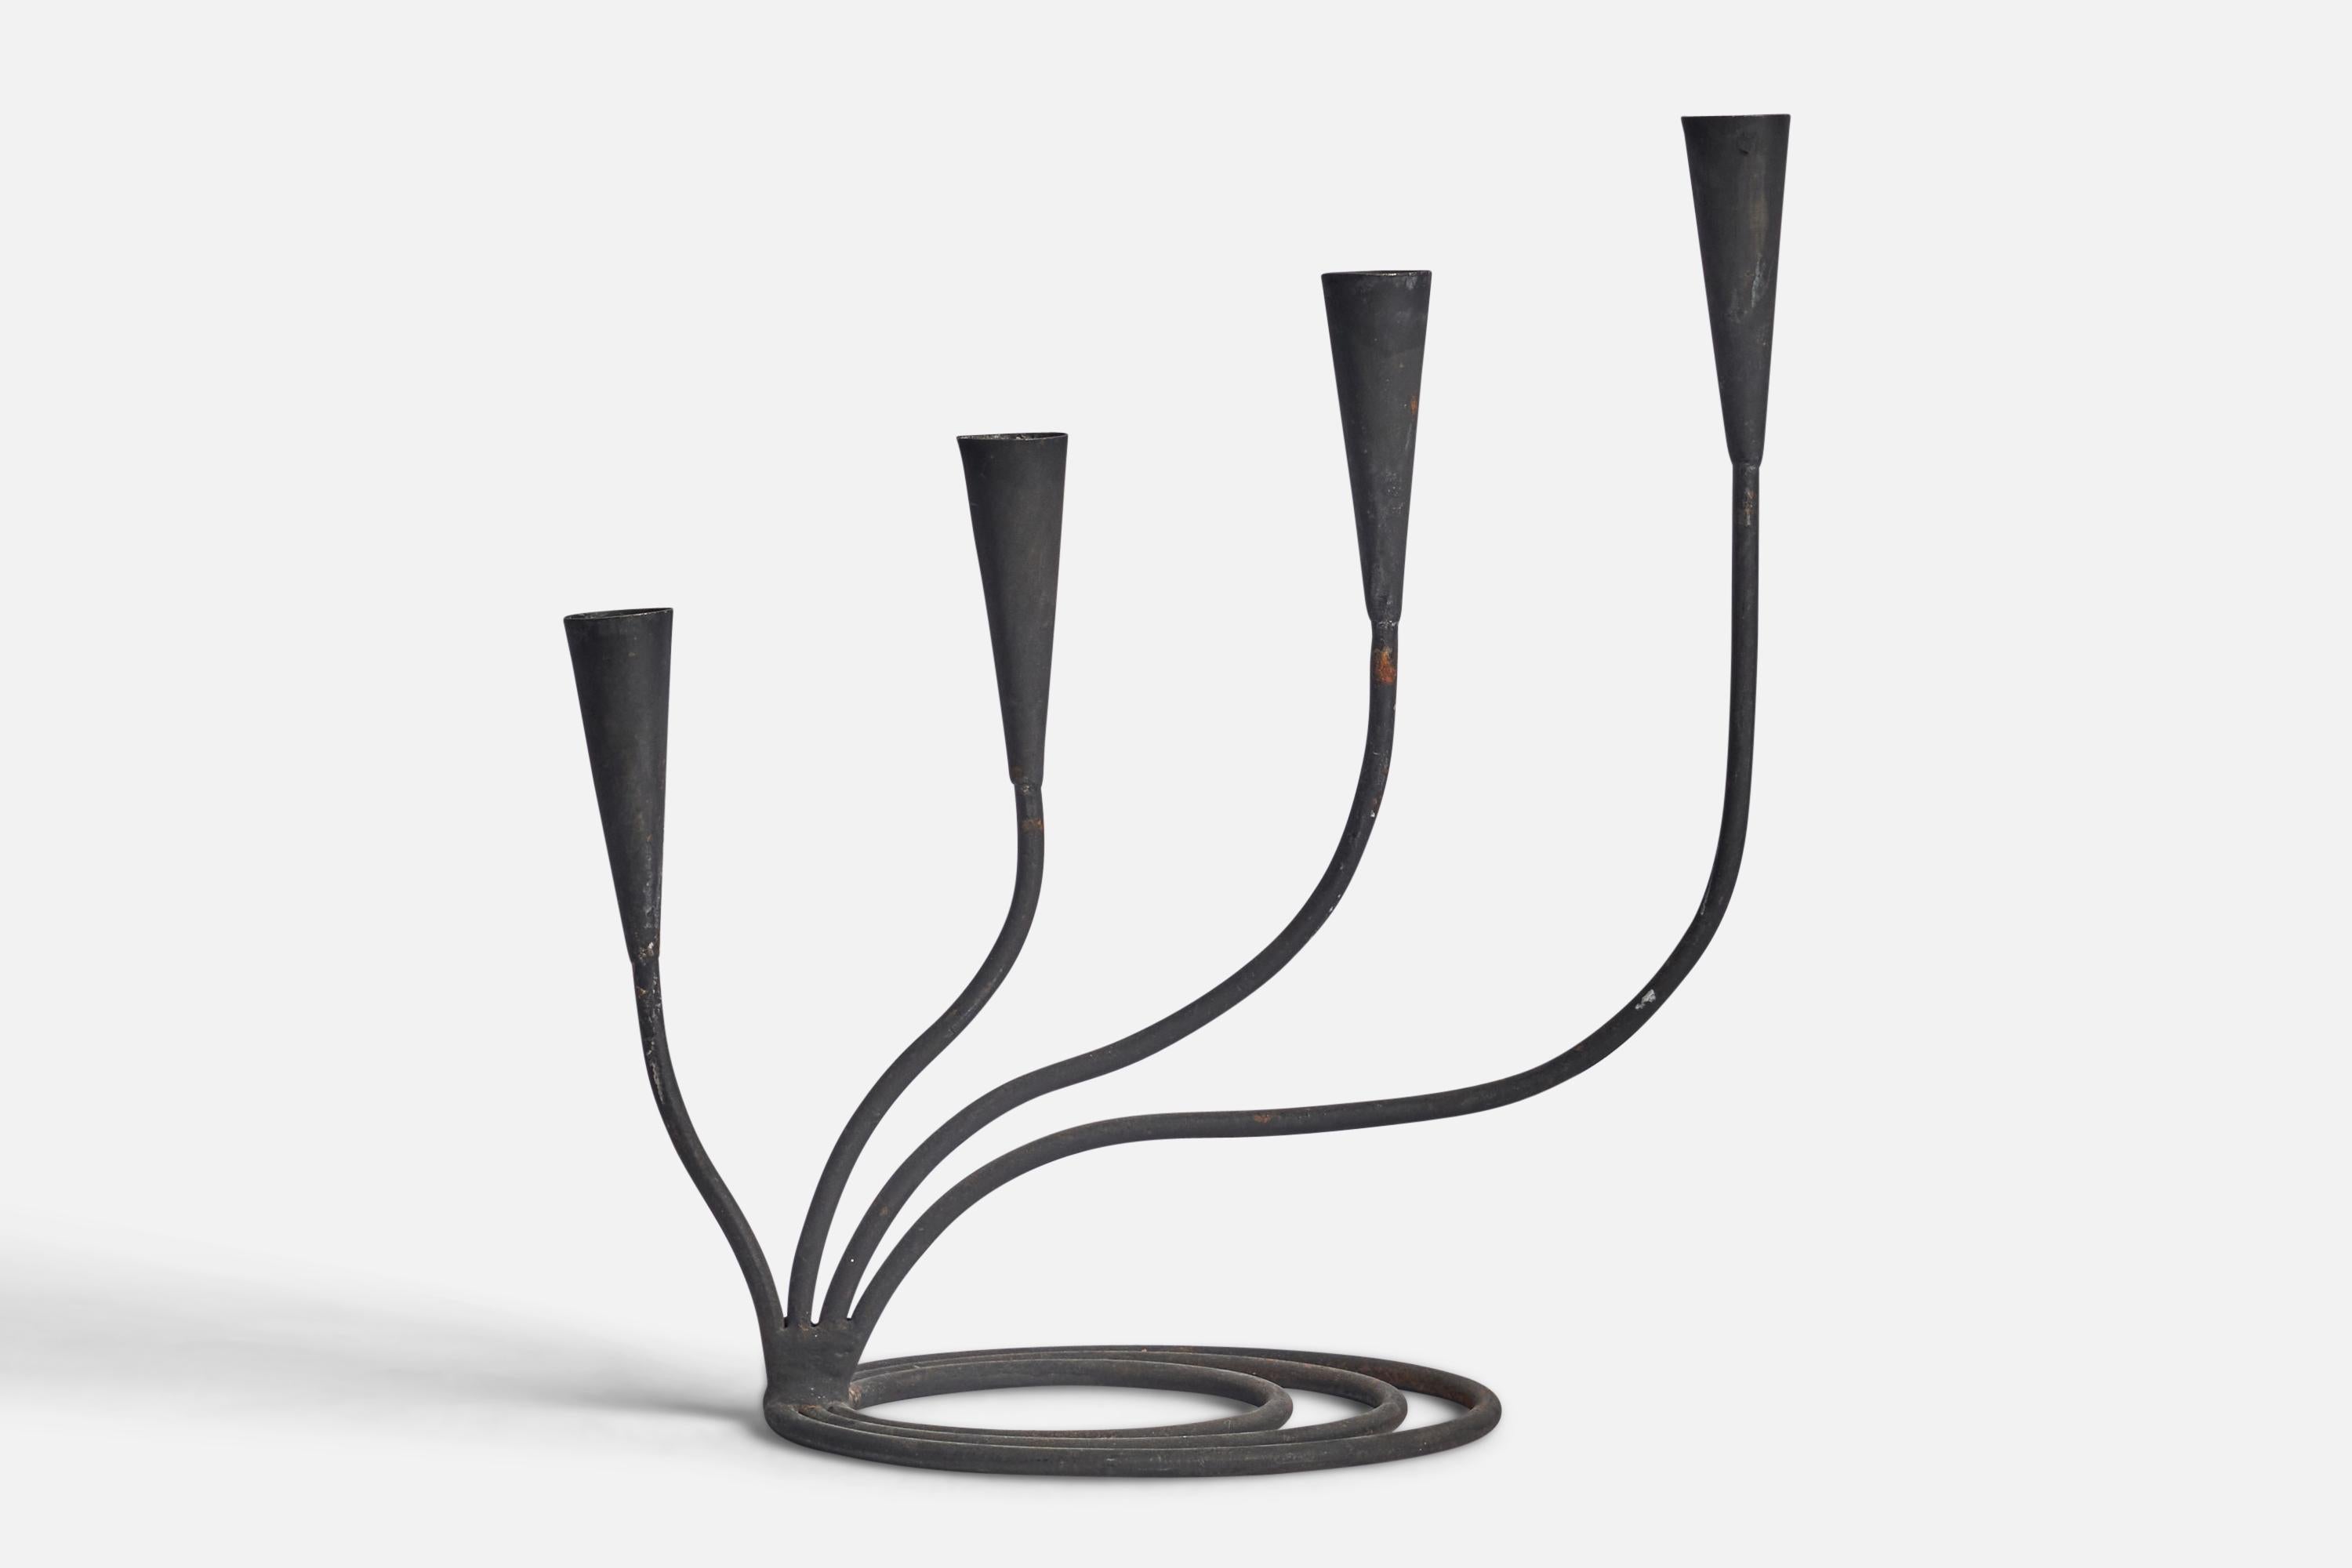 A black-painted iron candelabra designed and produced in Sweden, c. 1940s.

Fits 0.8” diameter candles